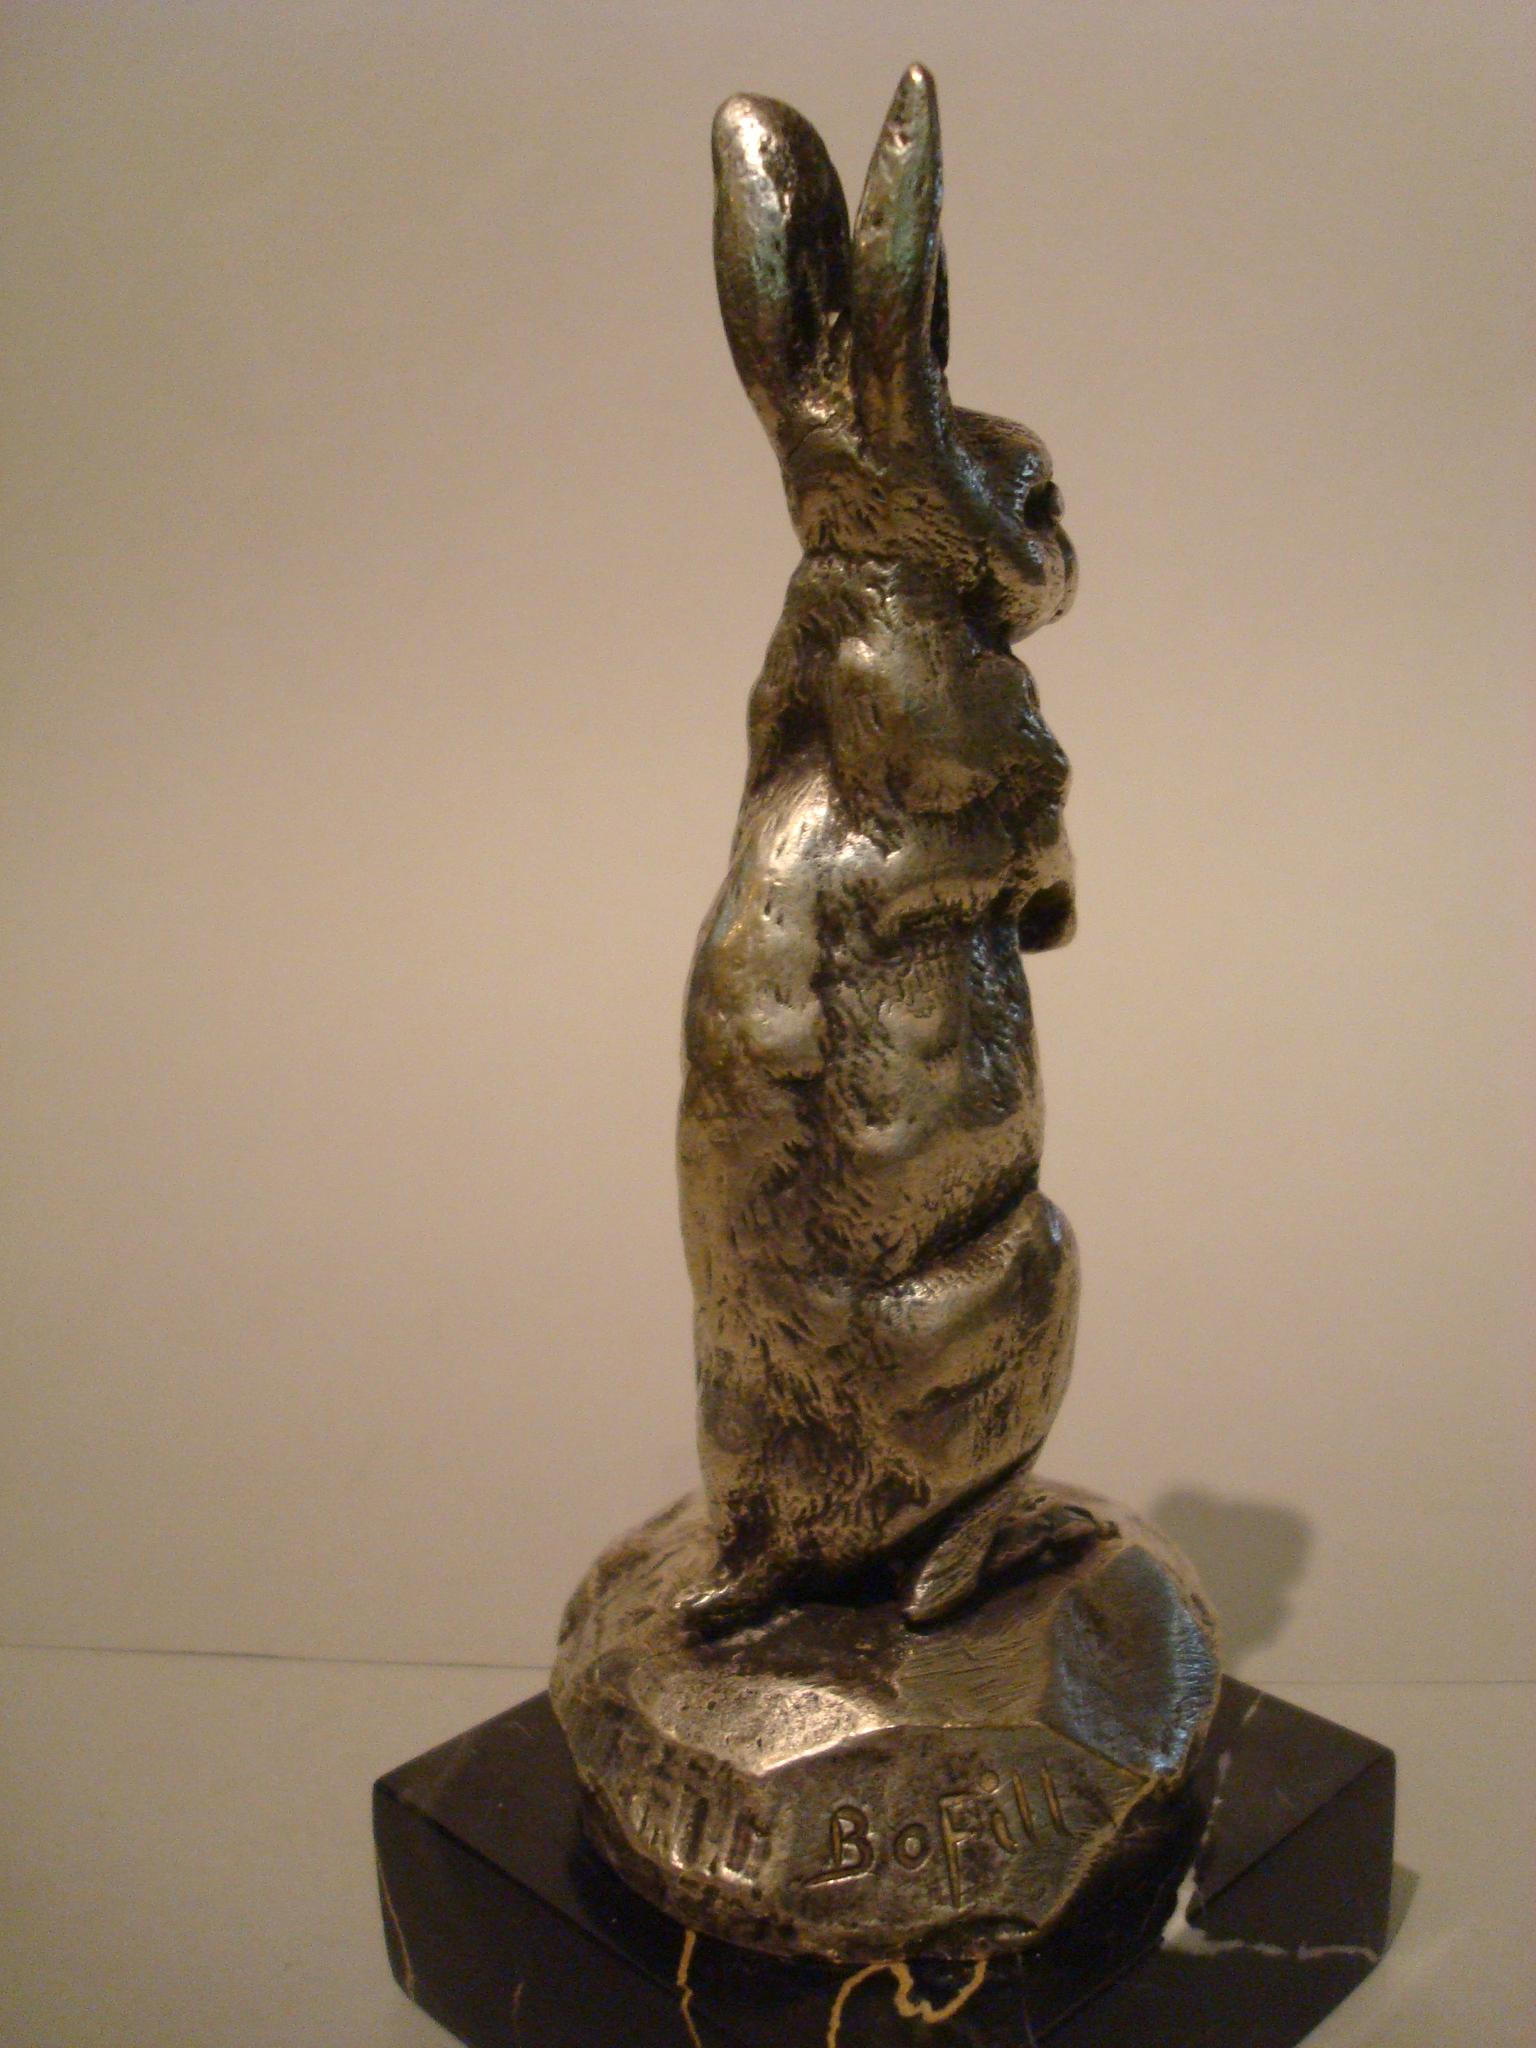 French silvered bronze rabbit car mascot hood ornament desk paperweight Signed Bofill, circa 1910-15. Rabbit Mascotte Automobil signed Bofill and marked with foundry mark.
Nice pieace of Automobilia. Mounted over a Black and gold Italian Portoro